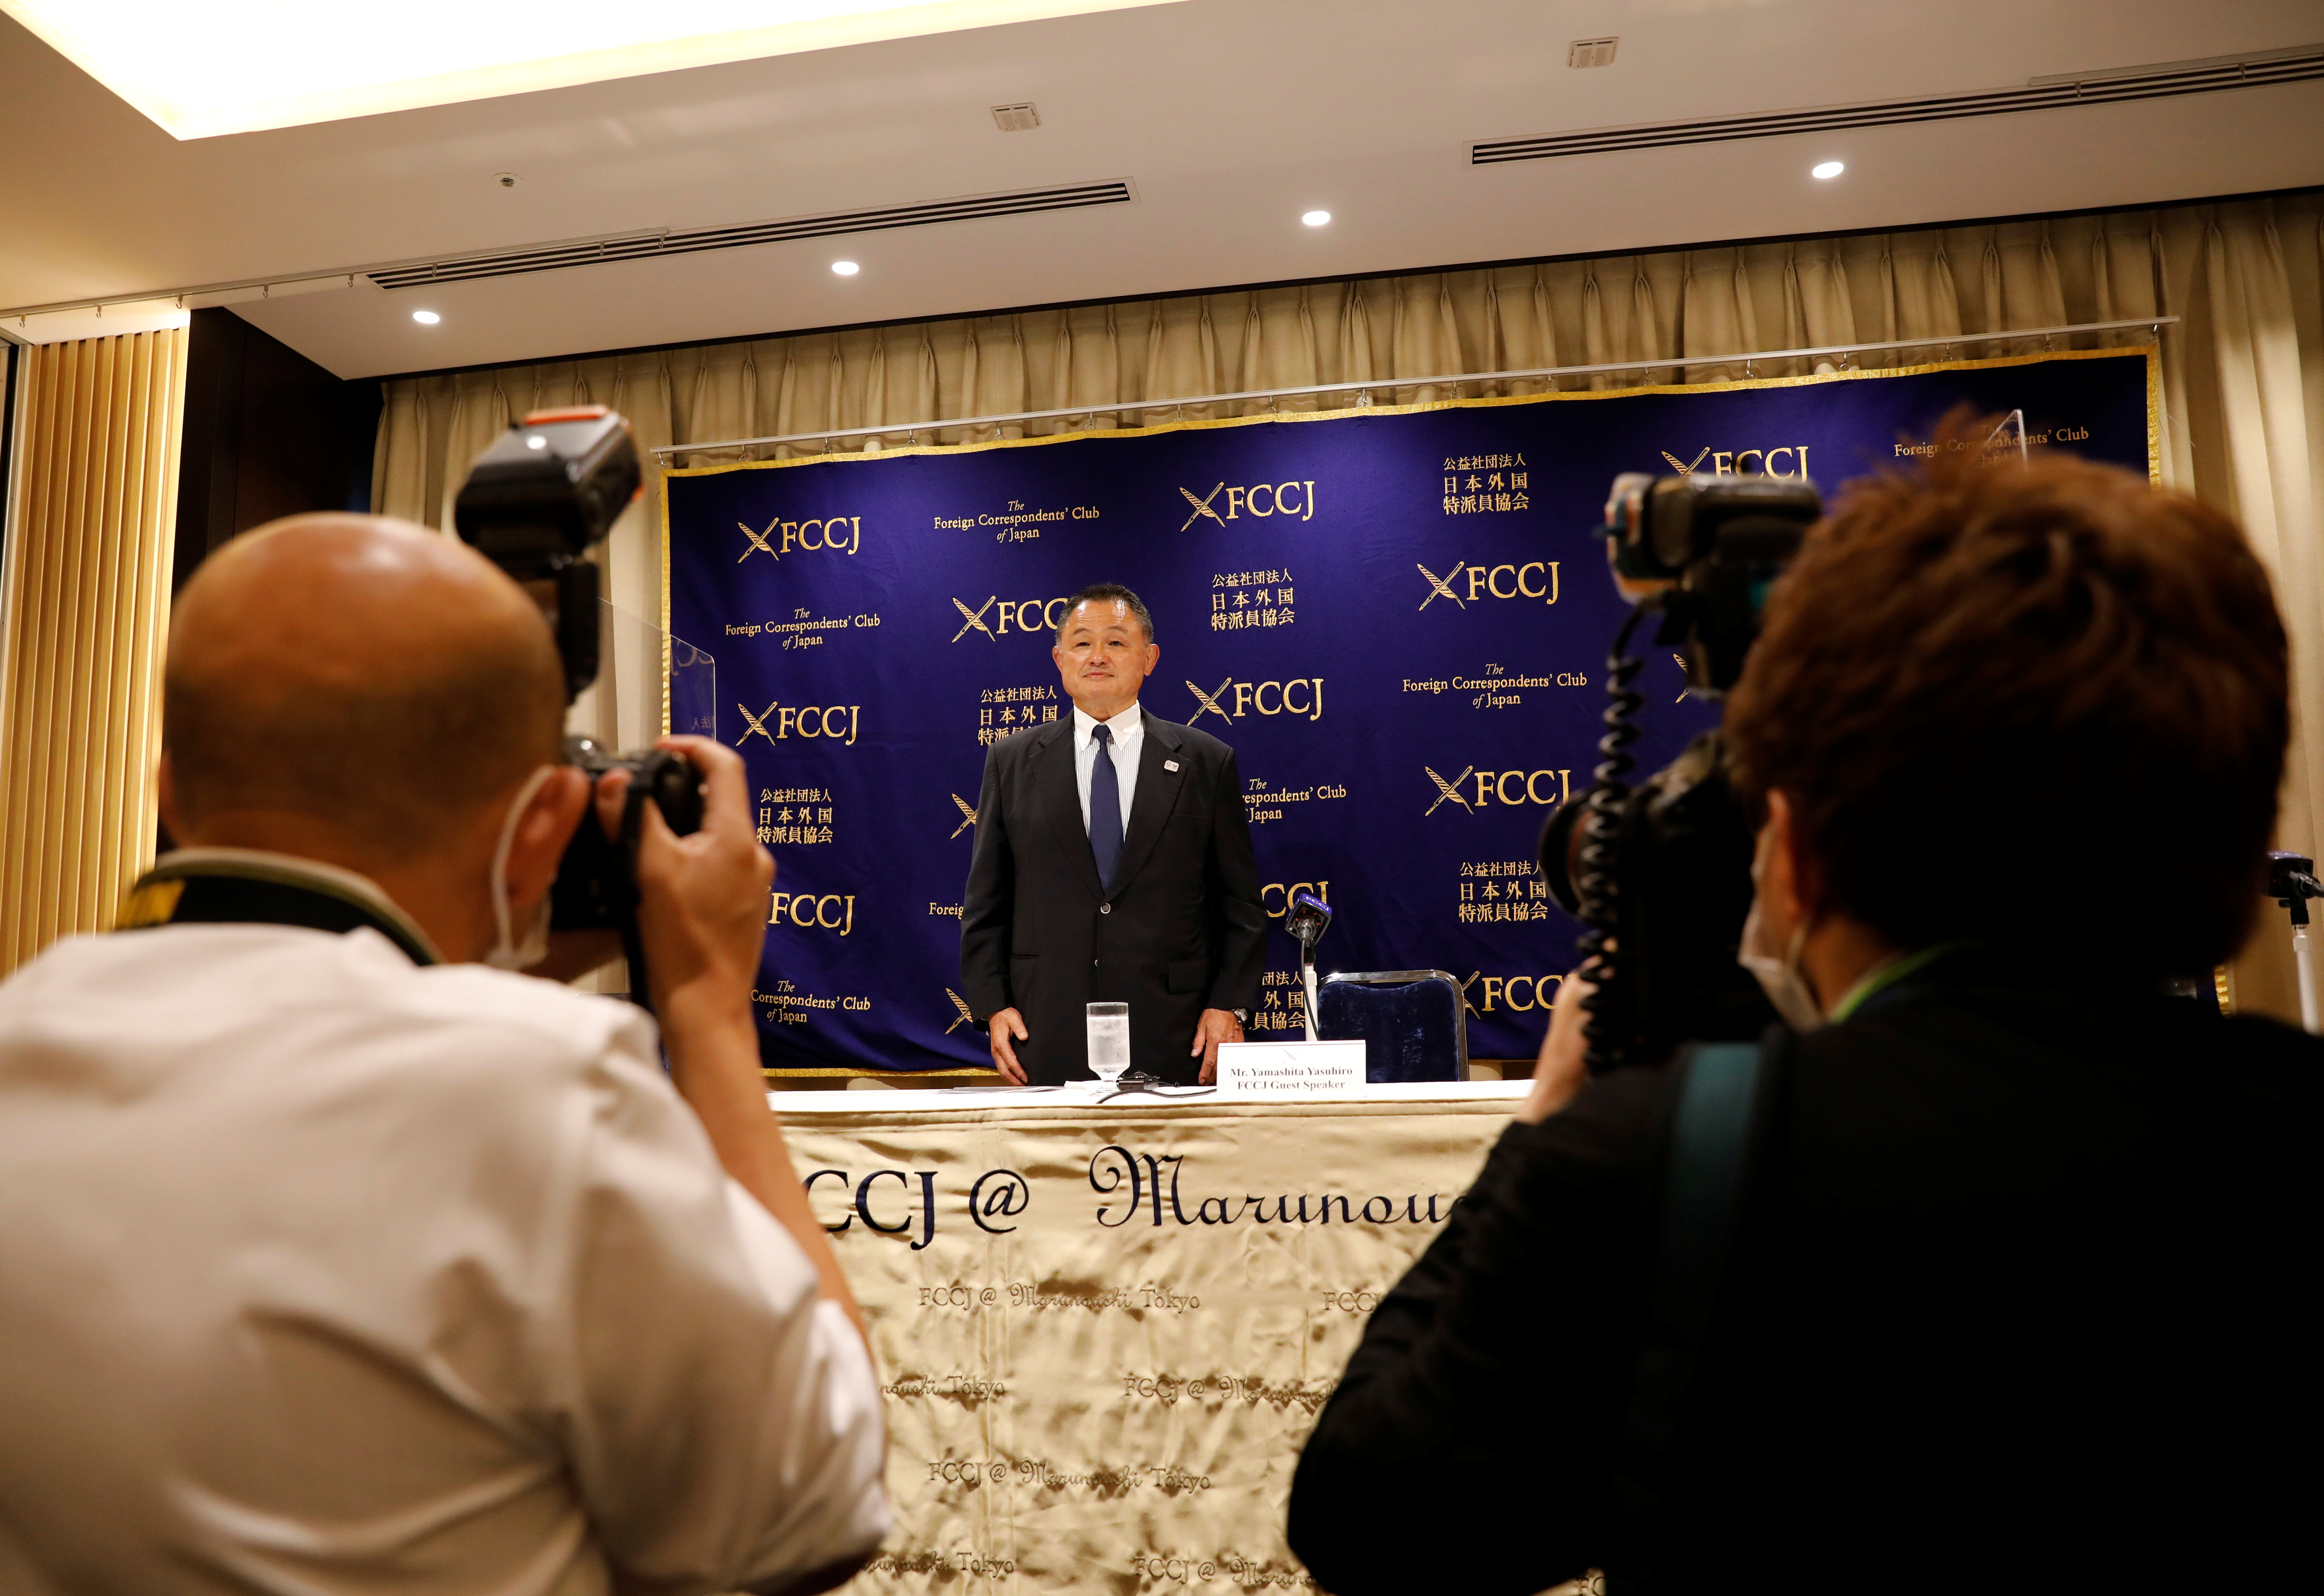 Japanese Olympic Committee President Yasuhiro Yamashita poses for photographers as he attends a news conference in Tokyo, Japan, June 28, 2021. REUTERS/Kim Kyung-Hoon